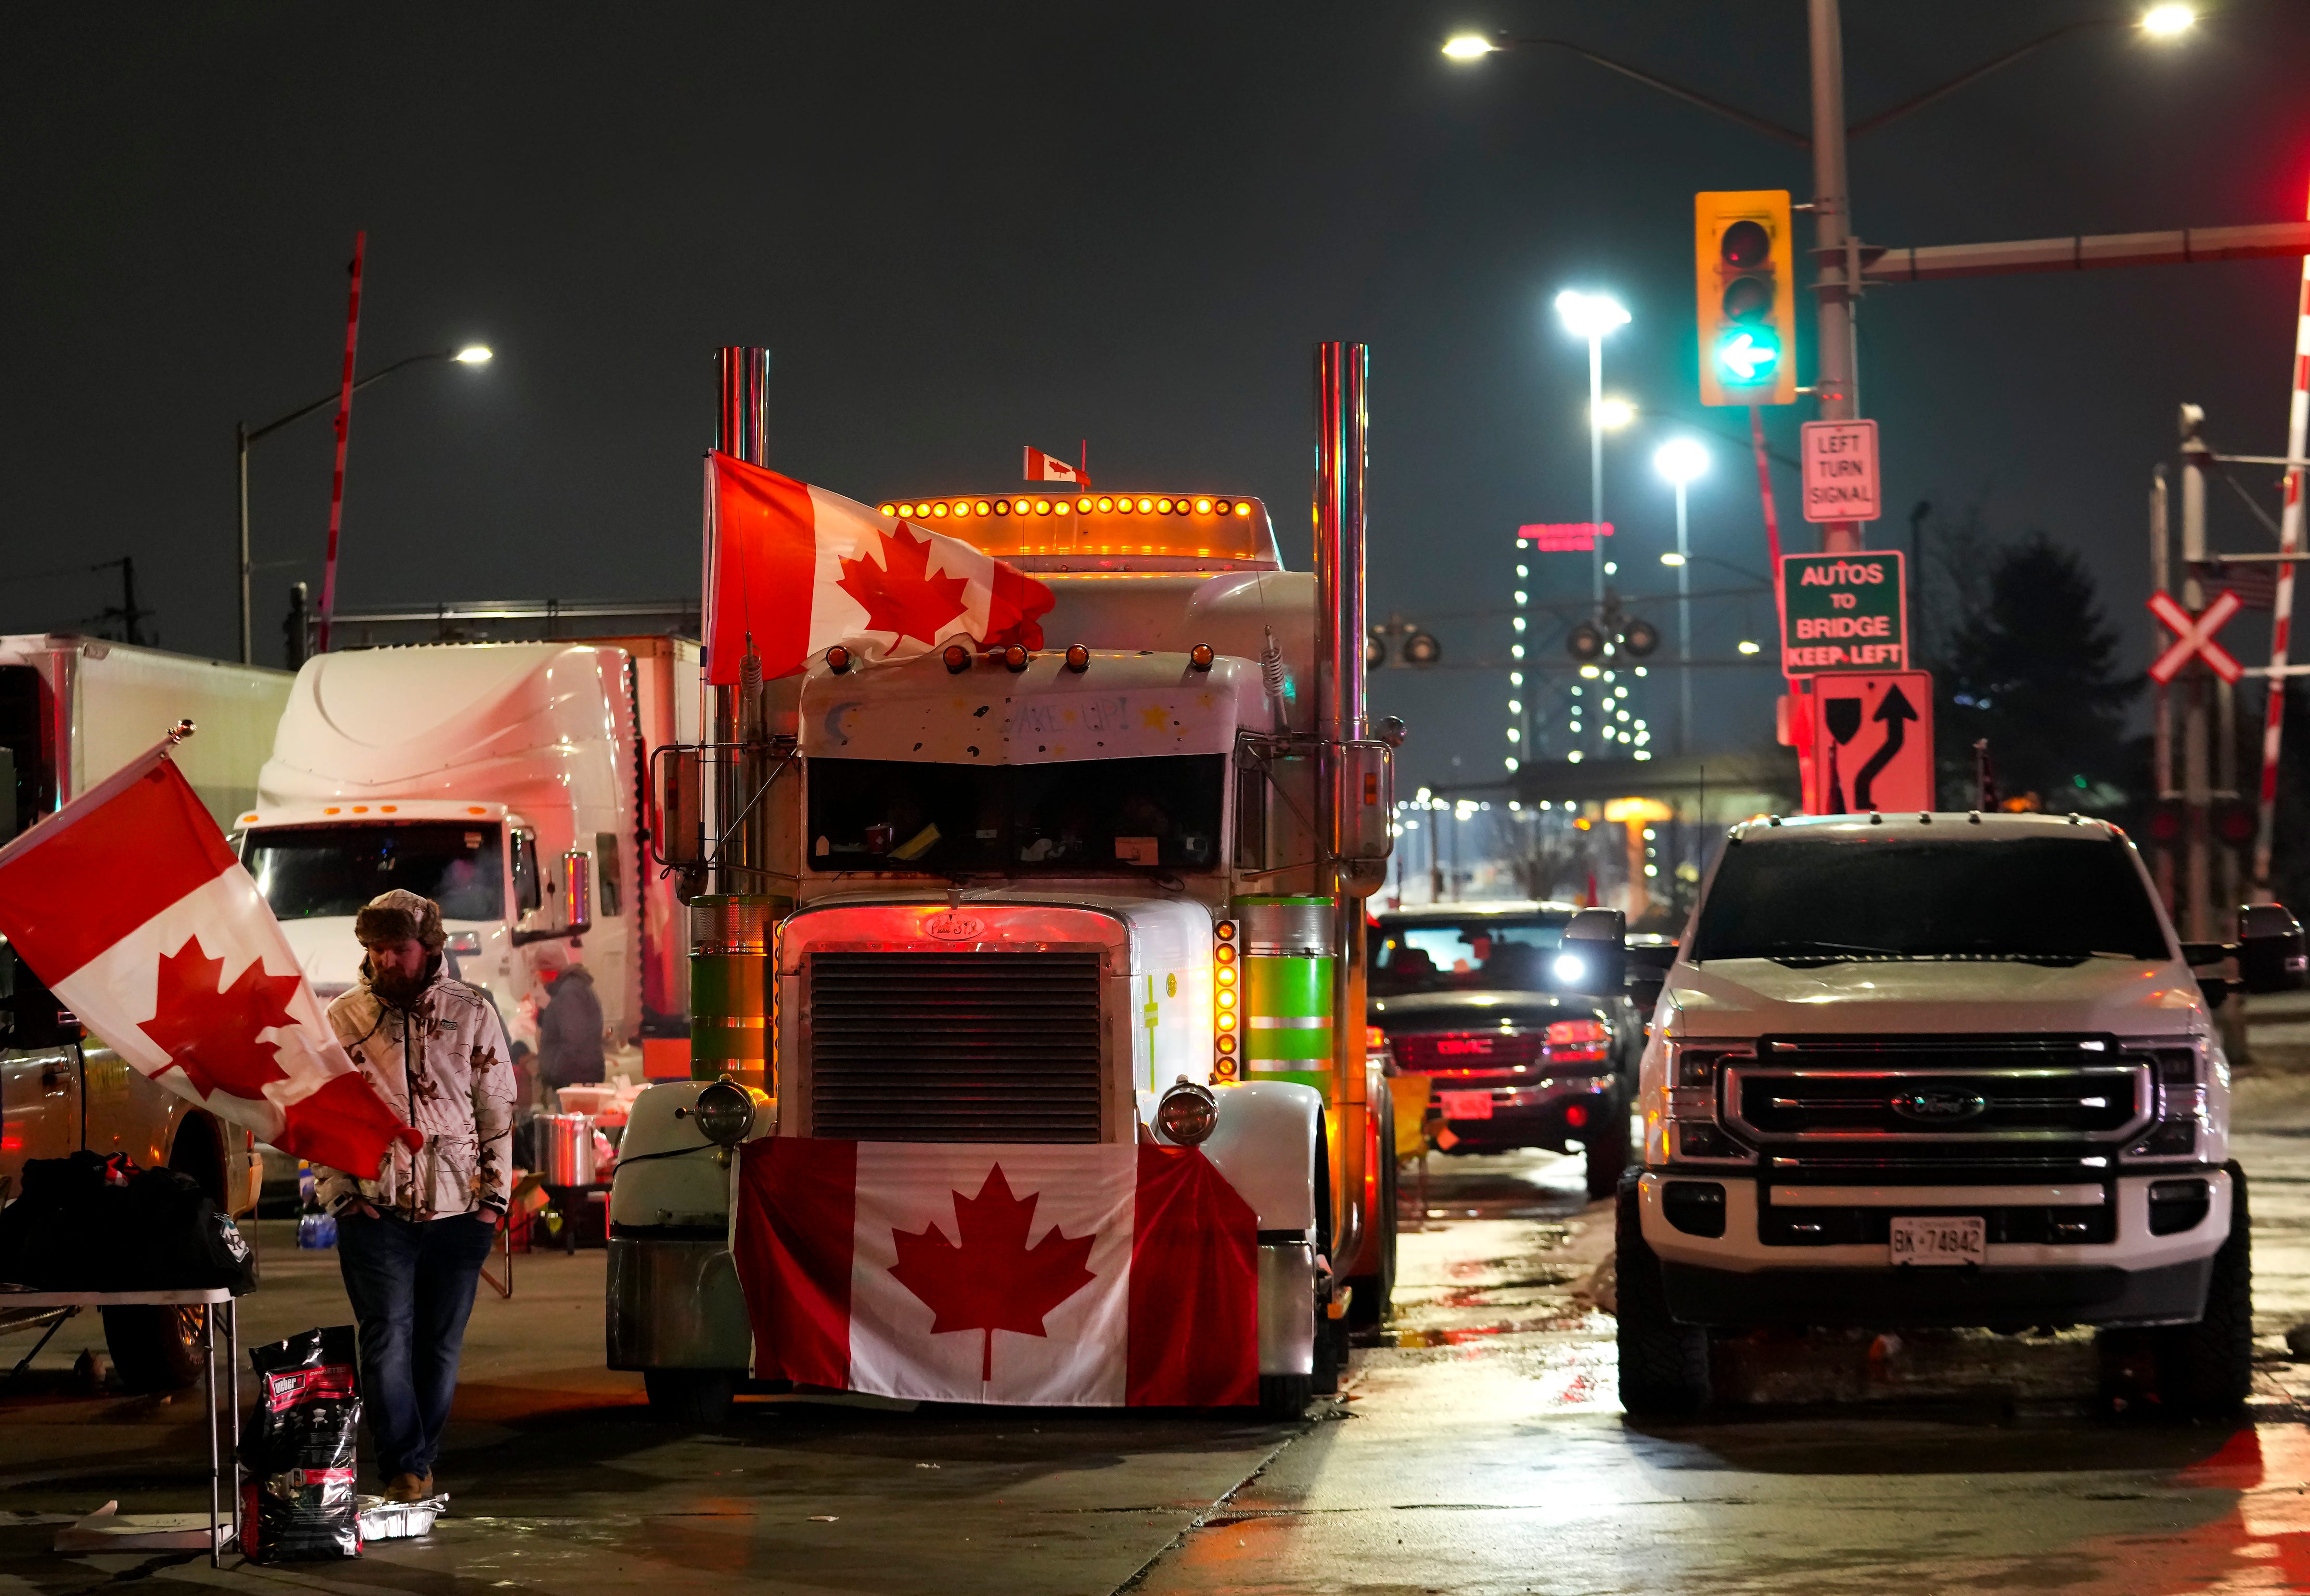 Truckers and supporters block the access leading from the Ambassador Bridge, linking Detroit and Windsor, as truckers and their supporters continue to protest against the COVID-19 vaccine mandates and restrictions in Windsor, Ontario, on Wednesday, Feb. 9, 2022.